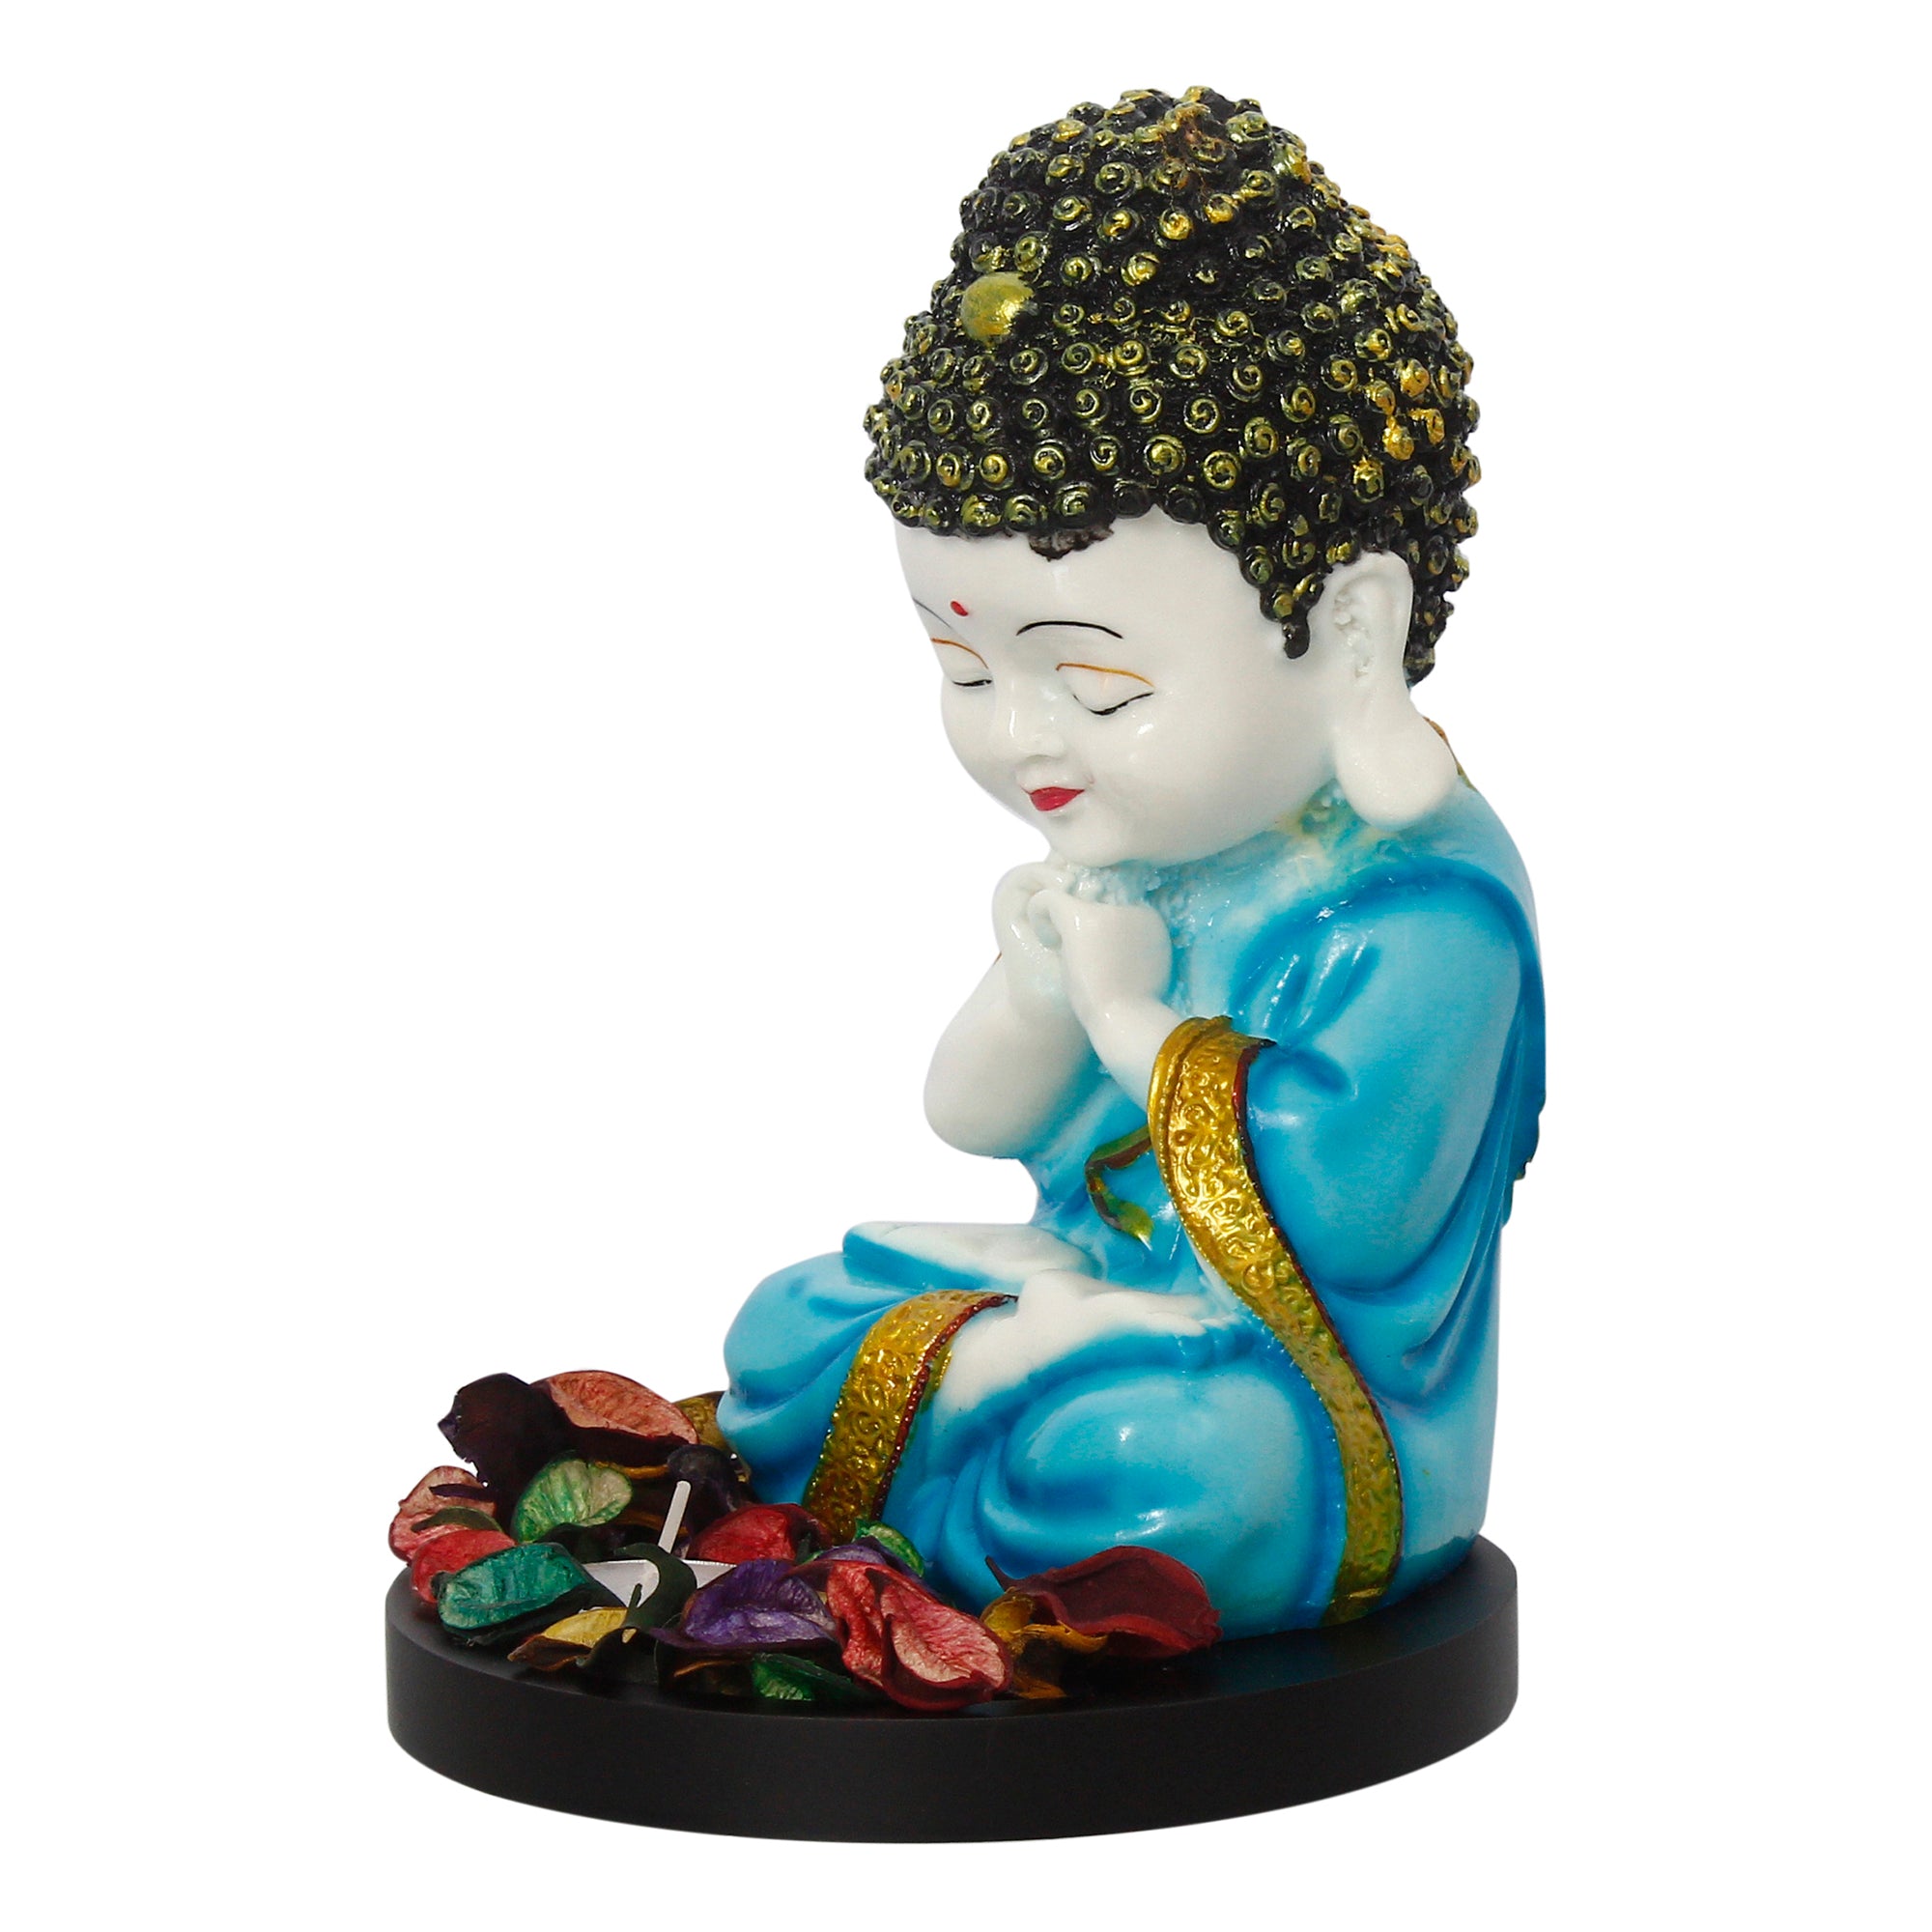 Polyresin Blue and White Praying Monk Buddha Statue with Wooden Base, Fragranced Petals and Tealight 5